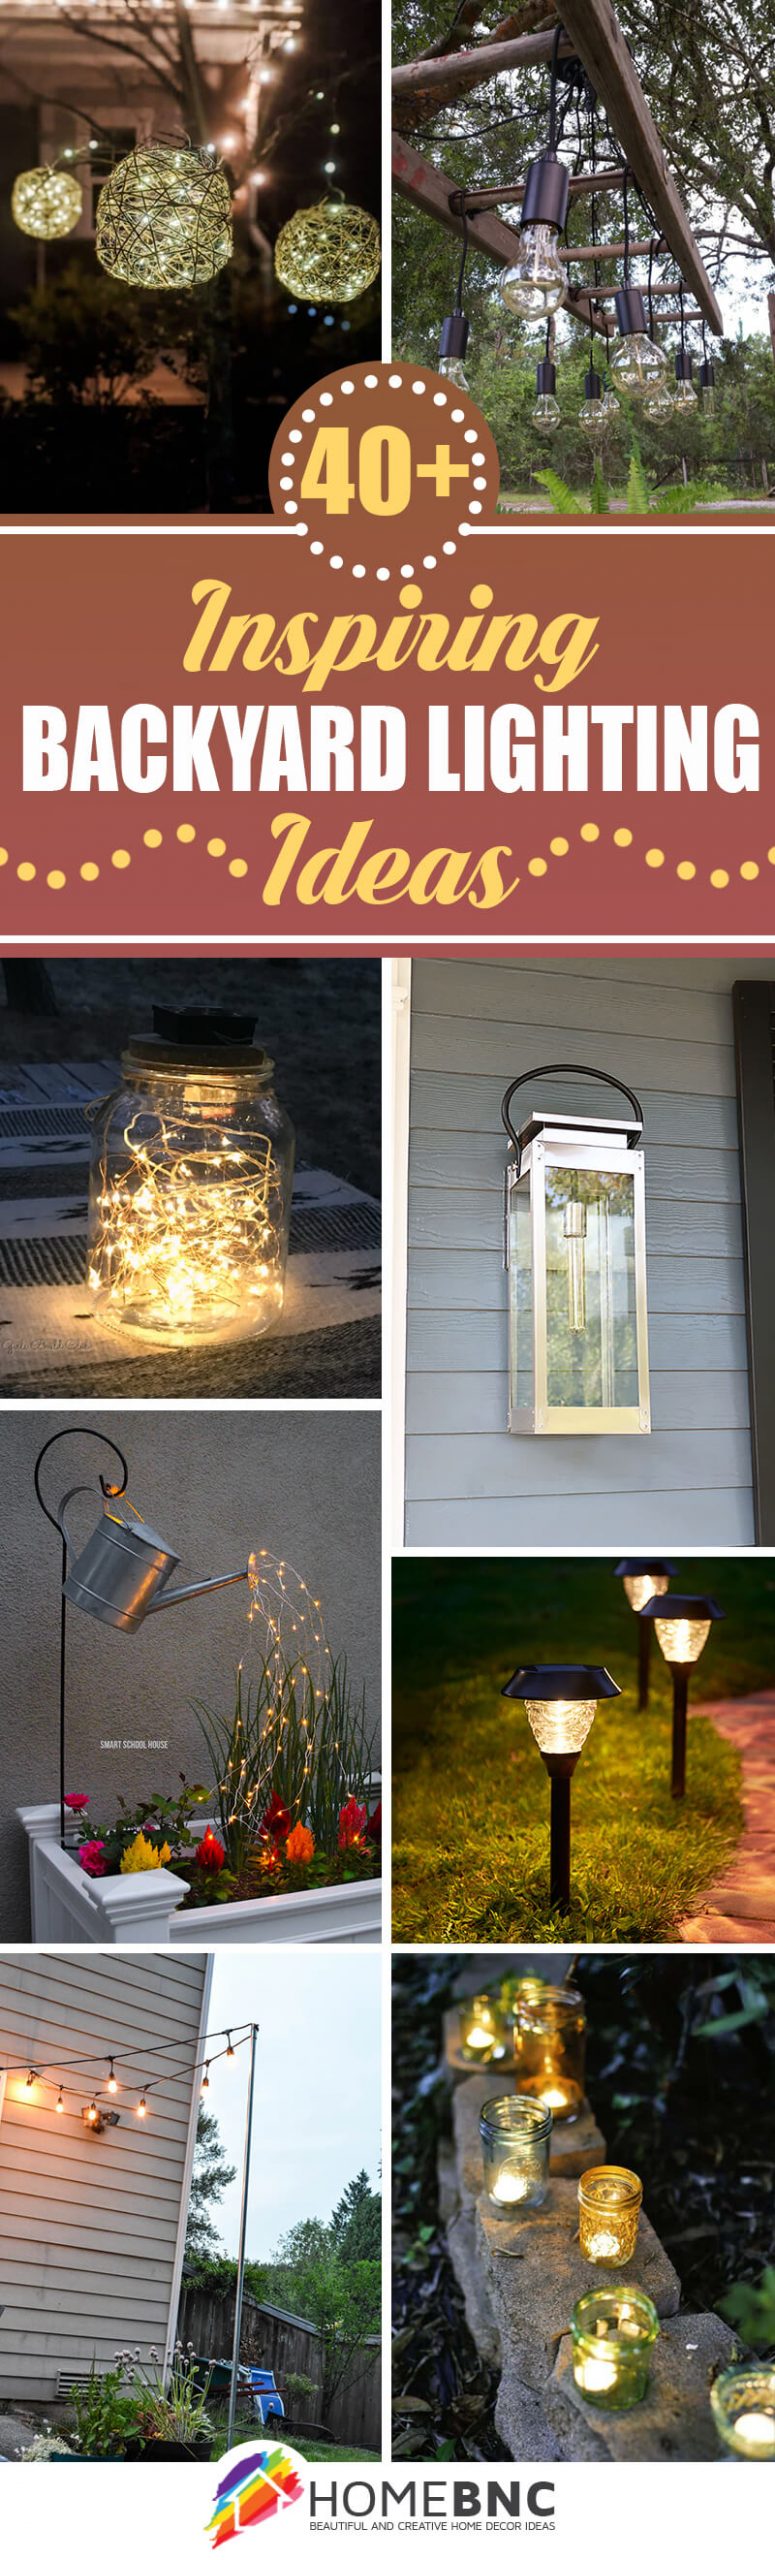 40 Best Backyard Lighting Ideas And, Lighted Yard Decorations For Summer Houses